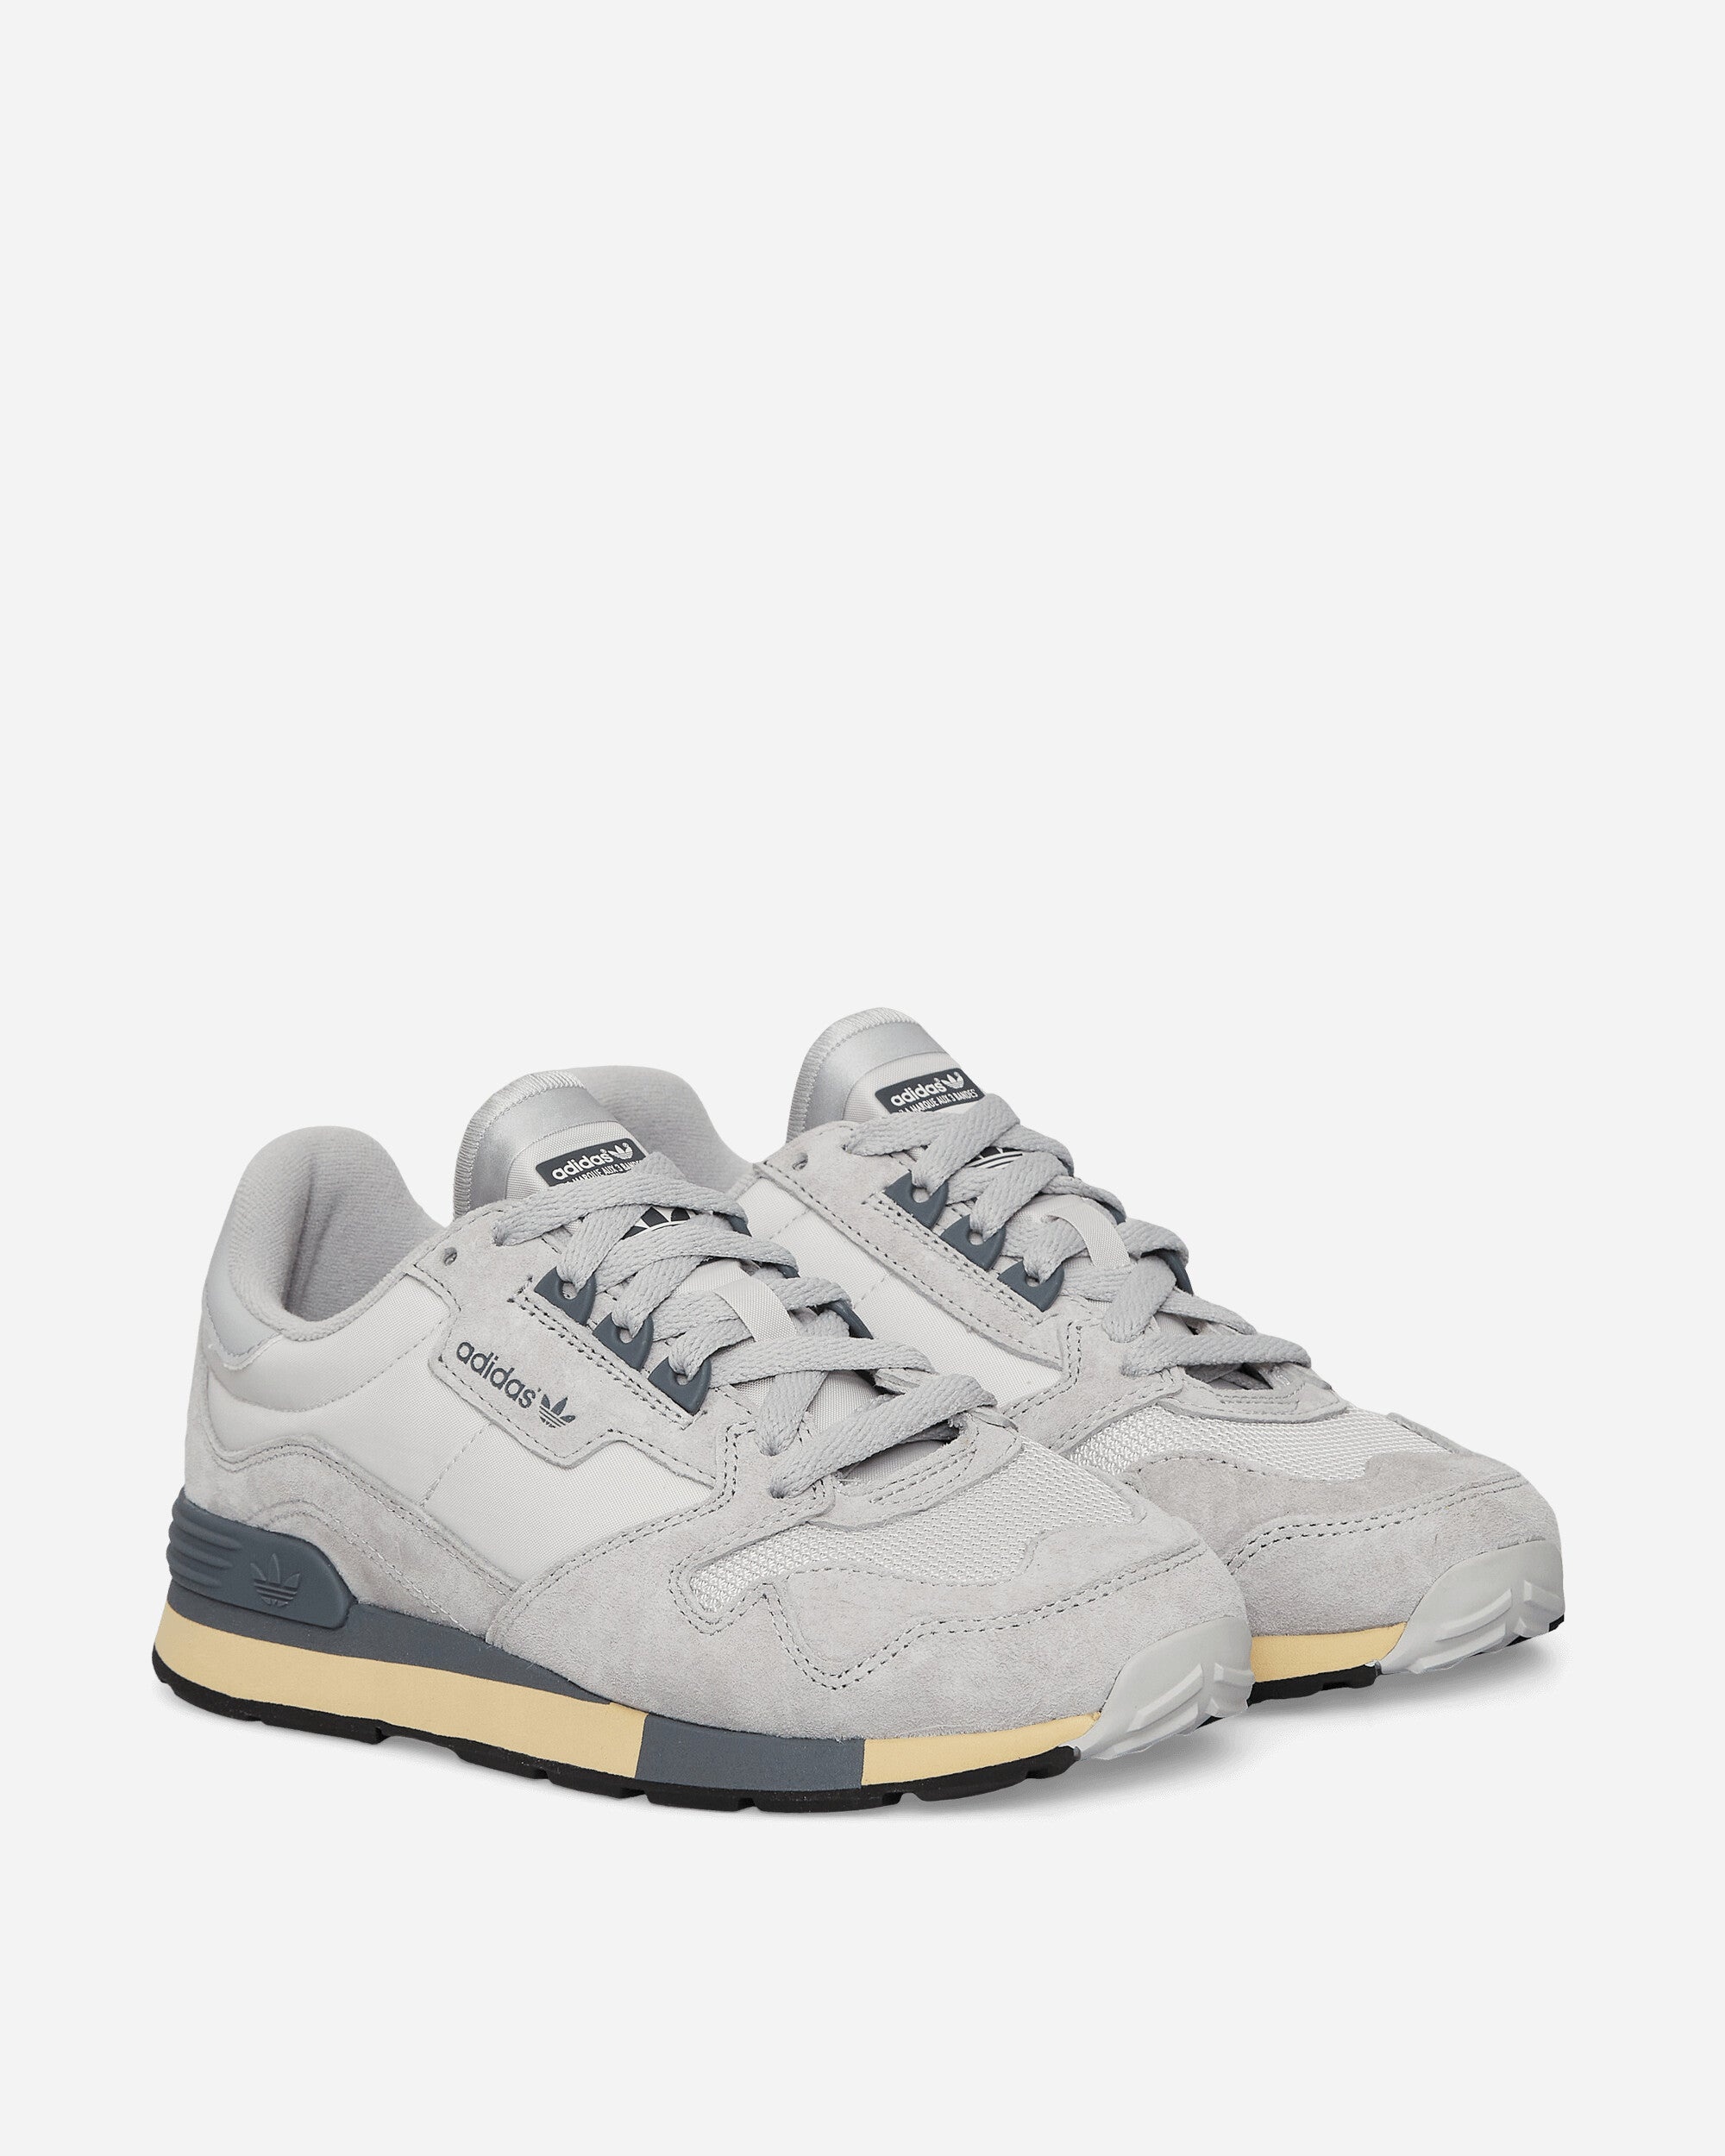 Whitworth SPZL Sneakers Grey One / Grey Two / Clear Onix - 2